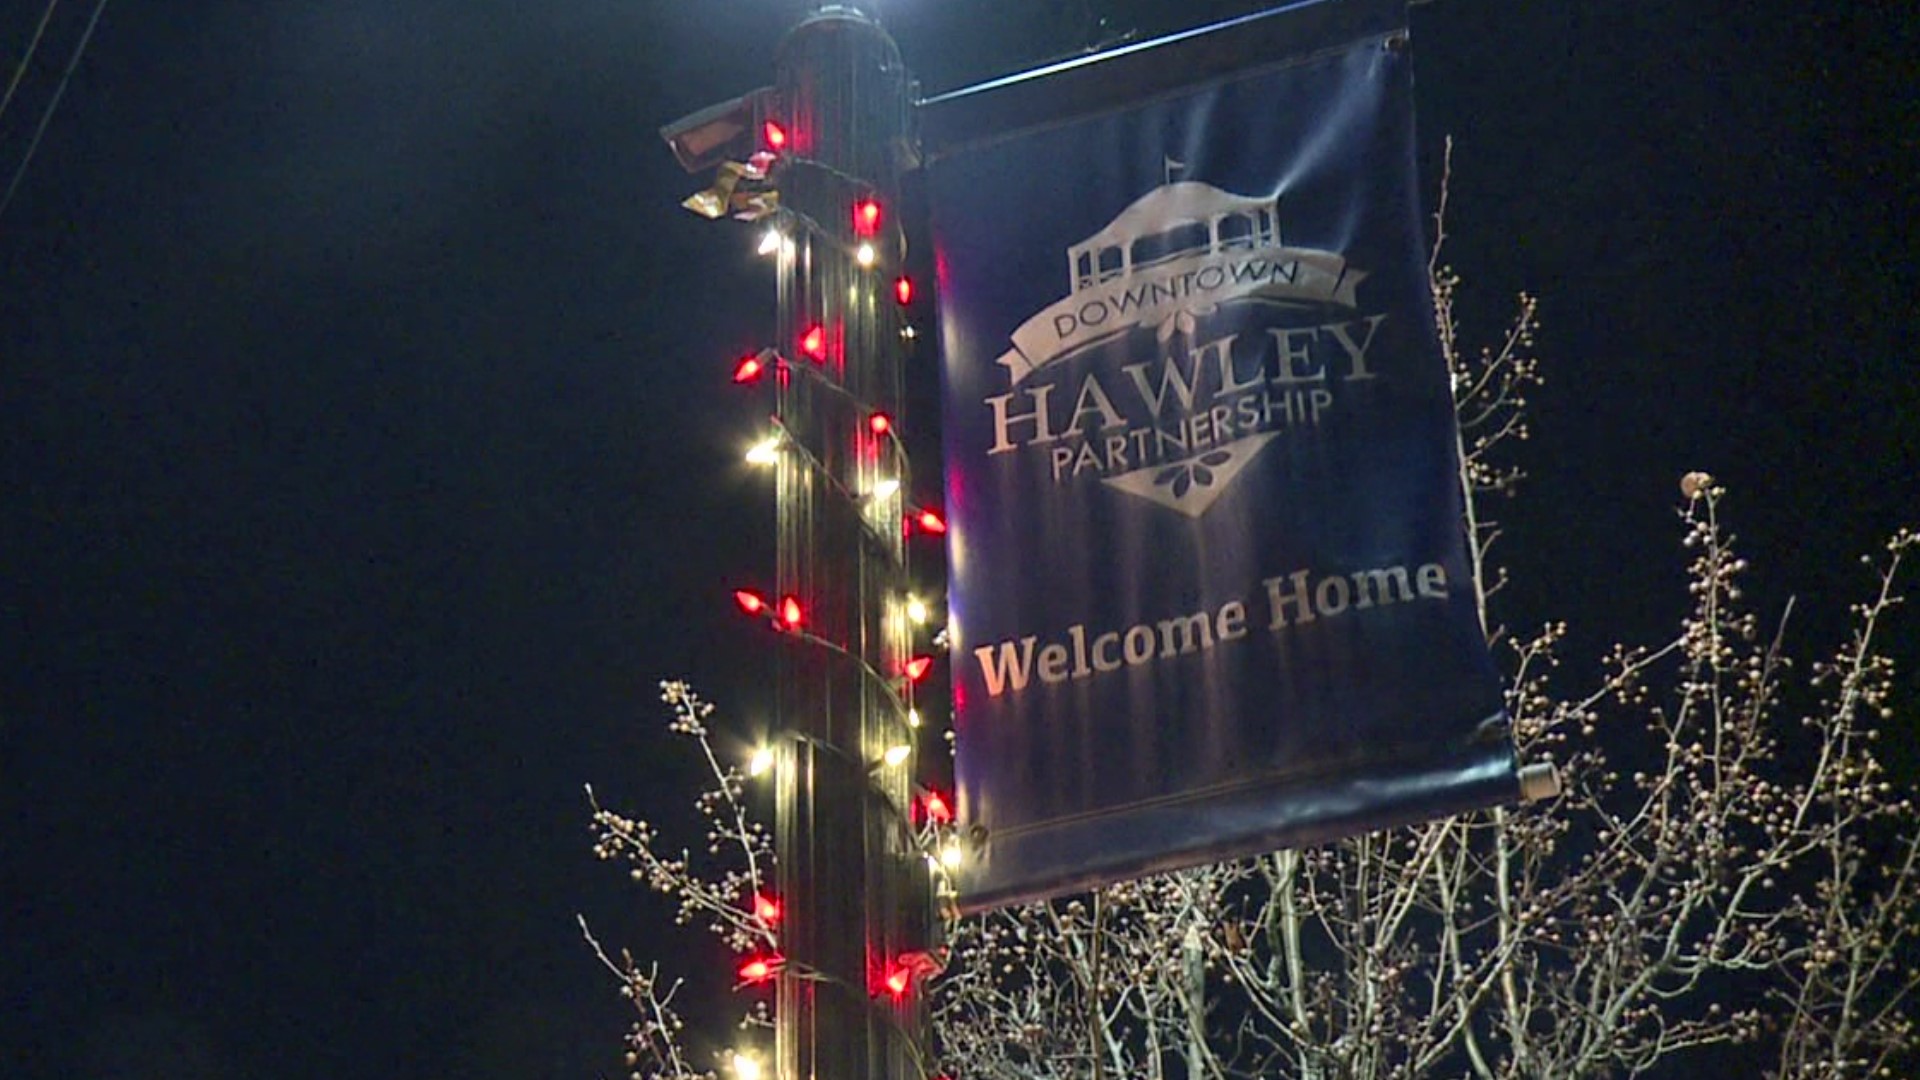 The Downtown Hawley Partnership is gearing up for a weekend of holiday magic.